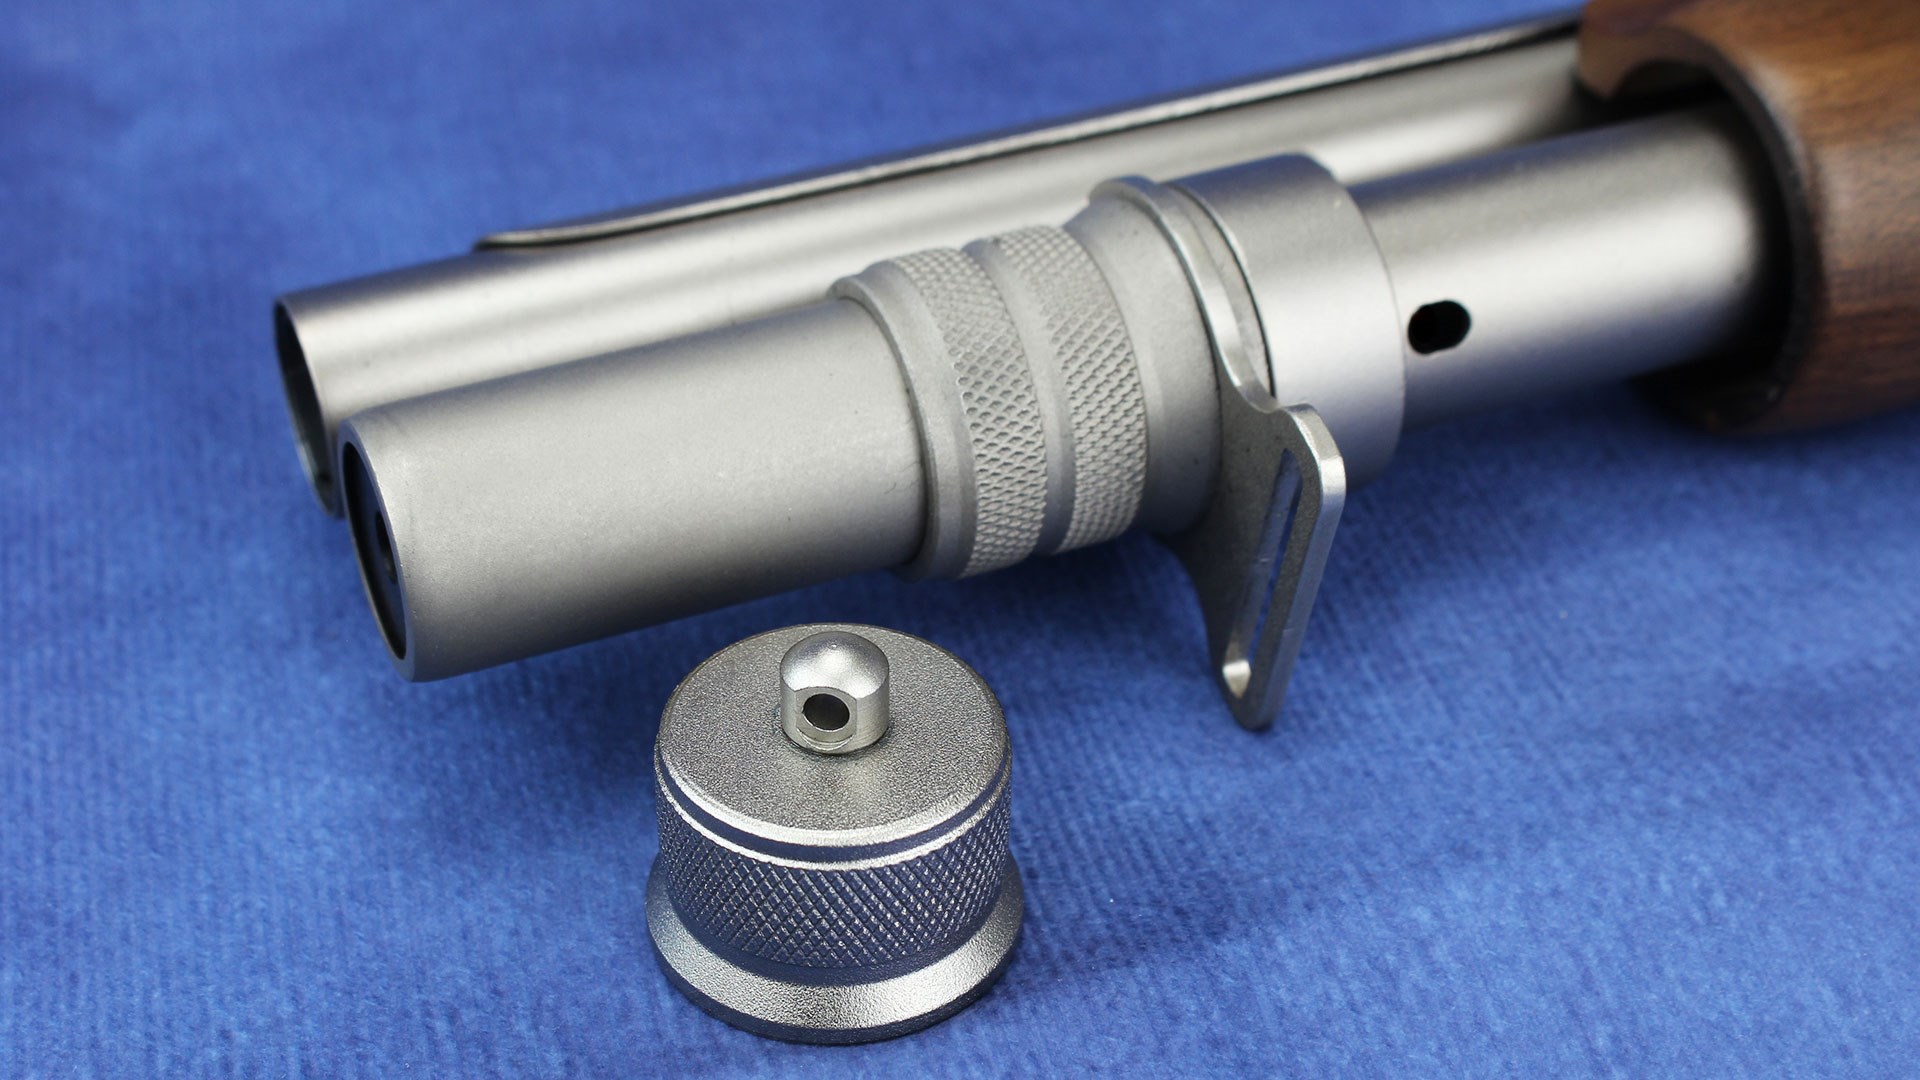 An installed tube extension cap compared with the standard magazine tube cap.